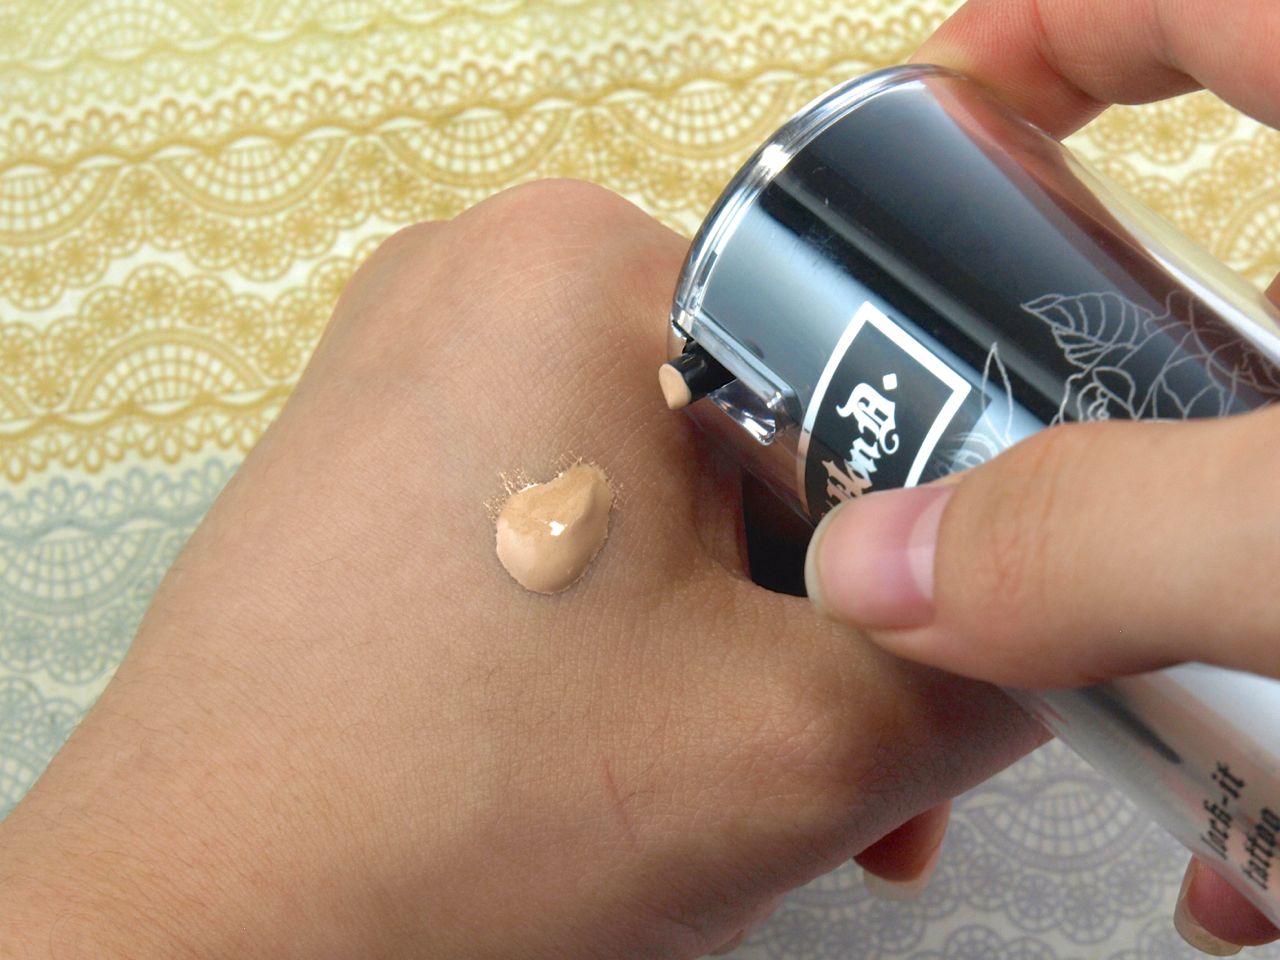 Cirkus mikroskopisk Regn Kat Von D Lock-It Tattoo Foundation in "Light 45": Review and Swatches |  The Happy Sloths: Beauty, Makeup, and Skincare Blog with Reviews and  Swatches